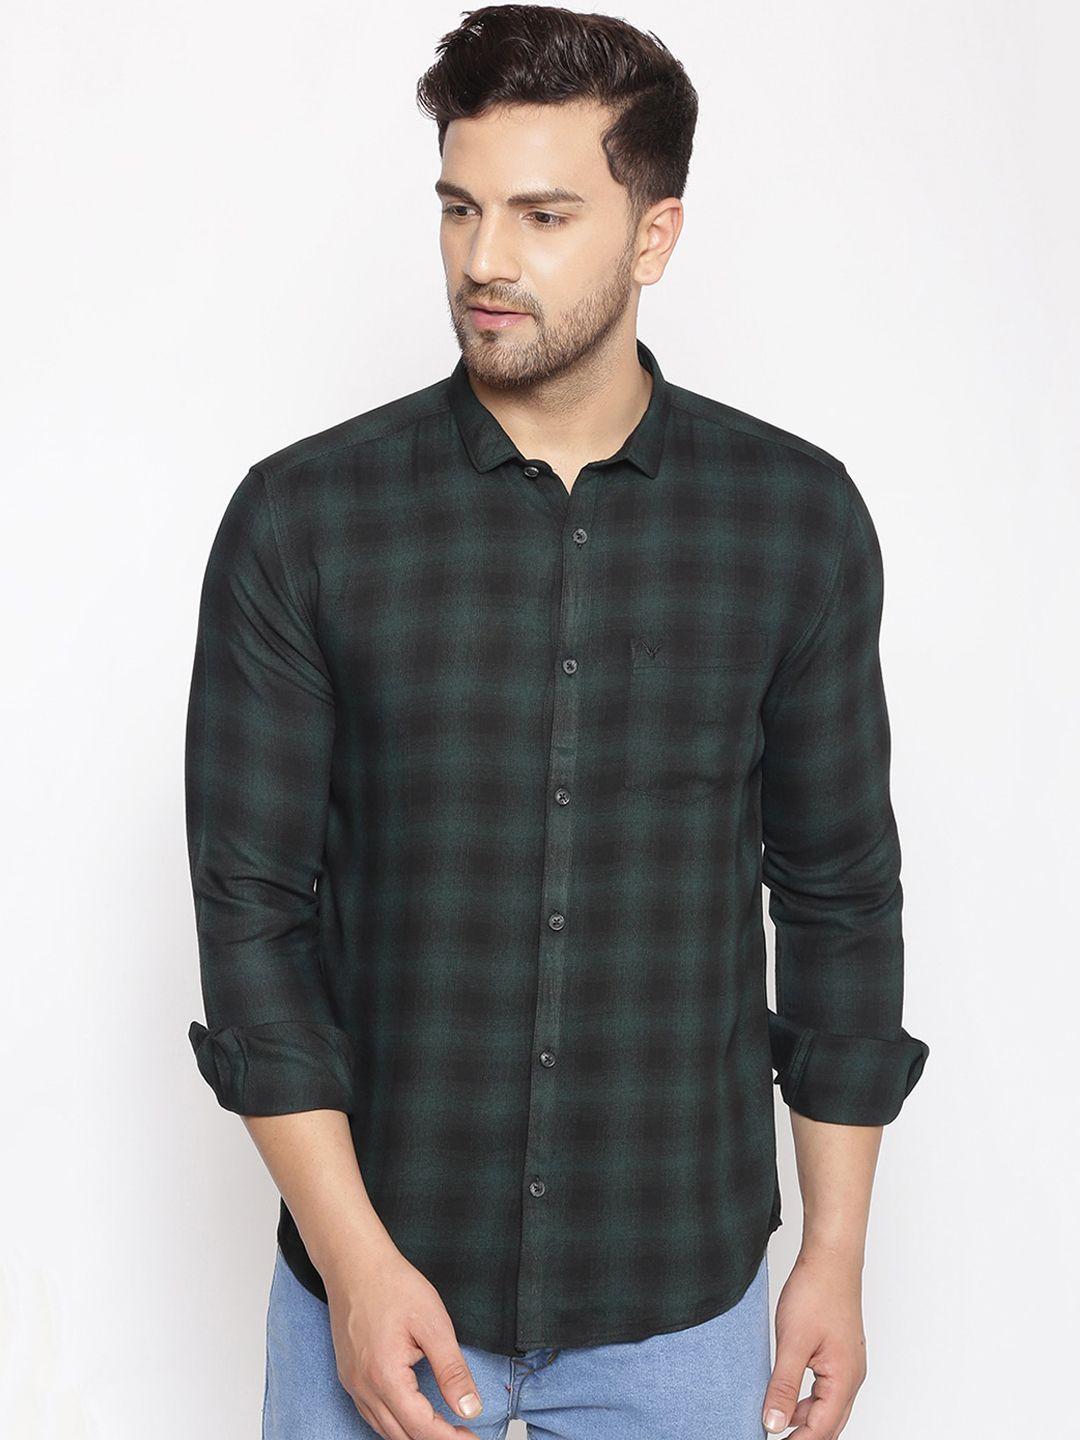 showoff-men-green-&-black-cotton-classic-slim-fit-checked-casual-shirt